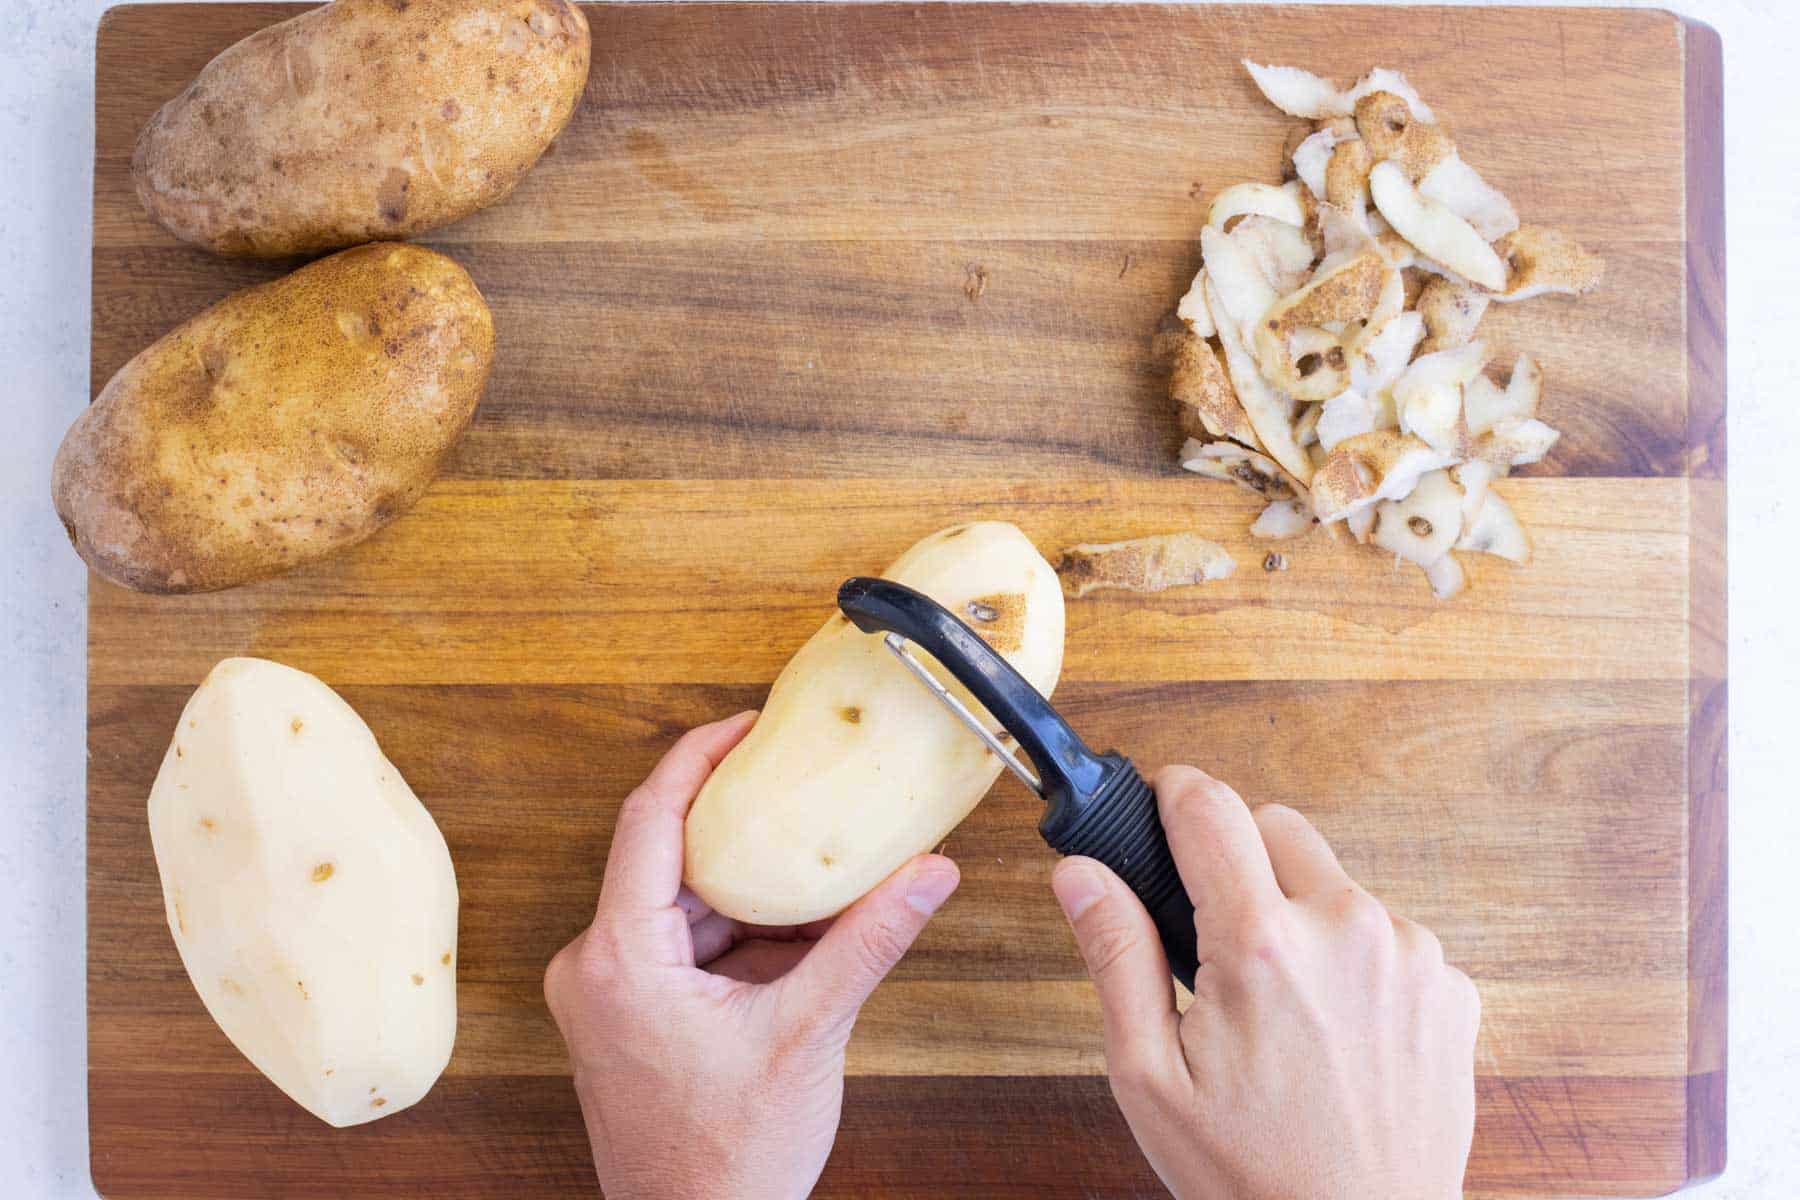 A vegetable peeler removes the skin of potatoes.